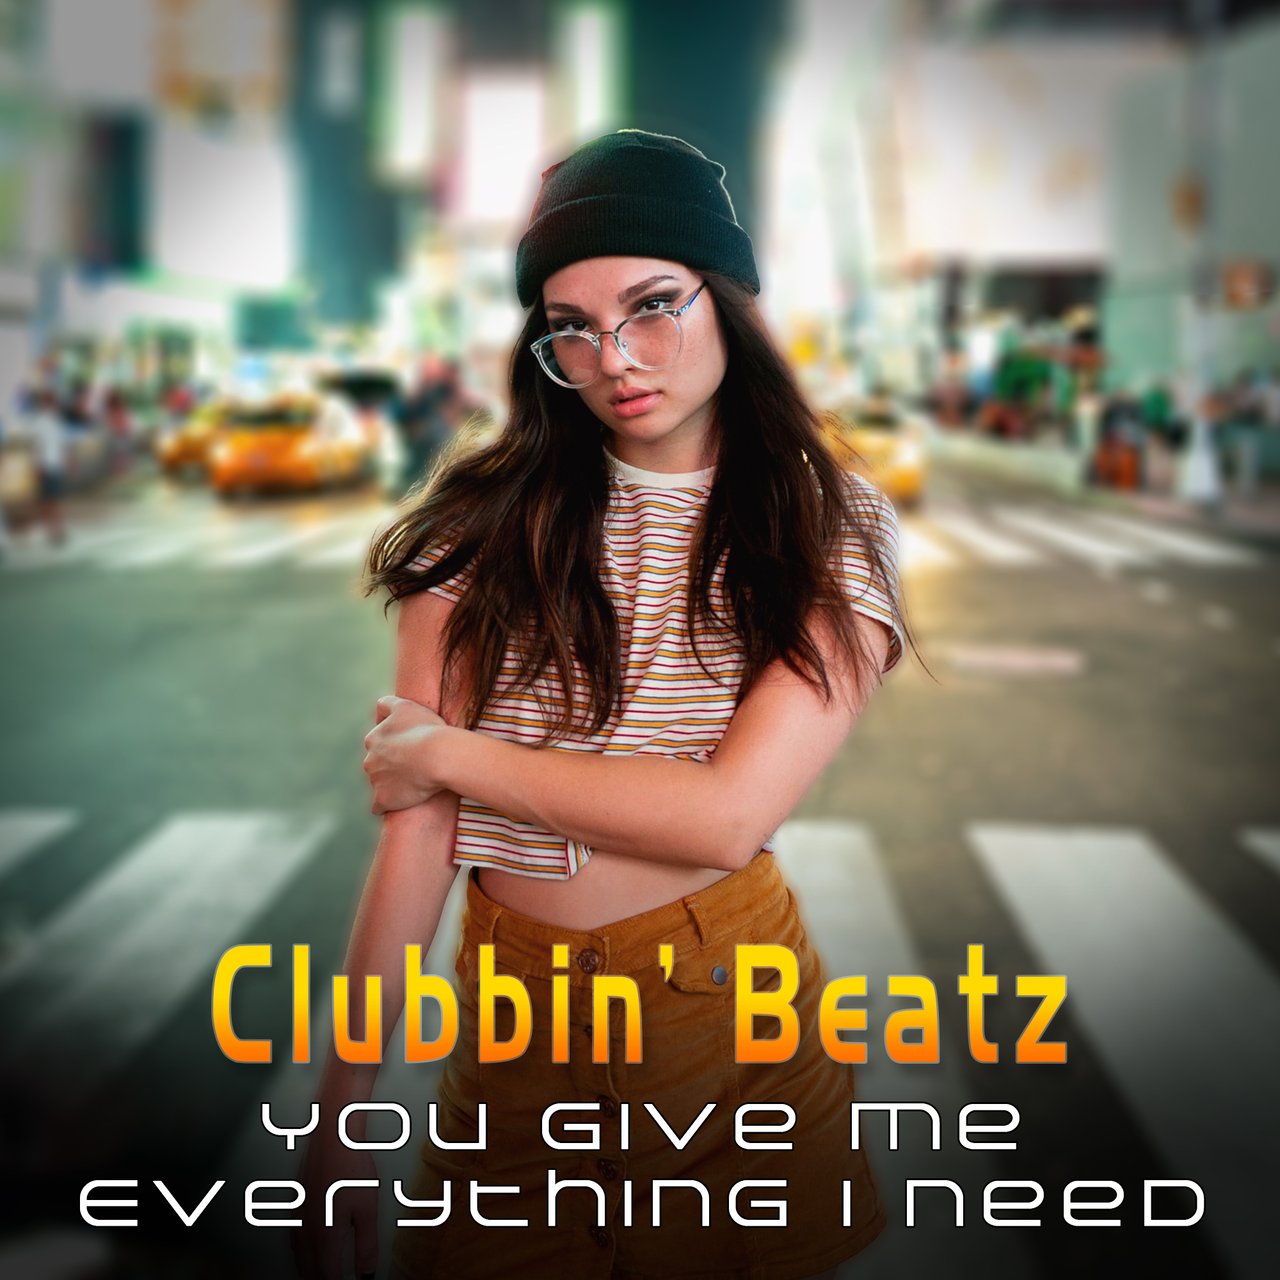 Clubbin' Beatz - You Give Me Everything I Need (freestyle version) 